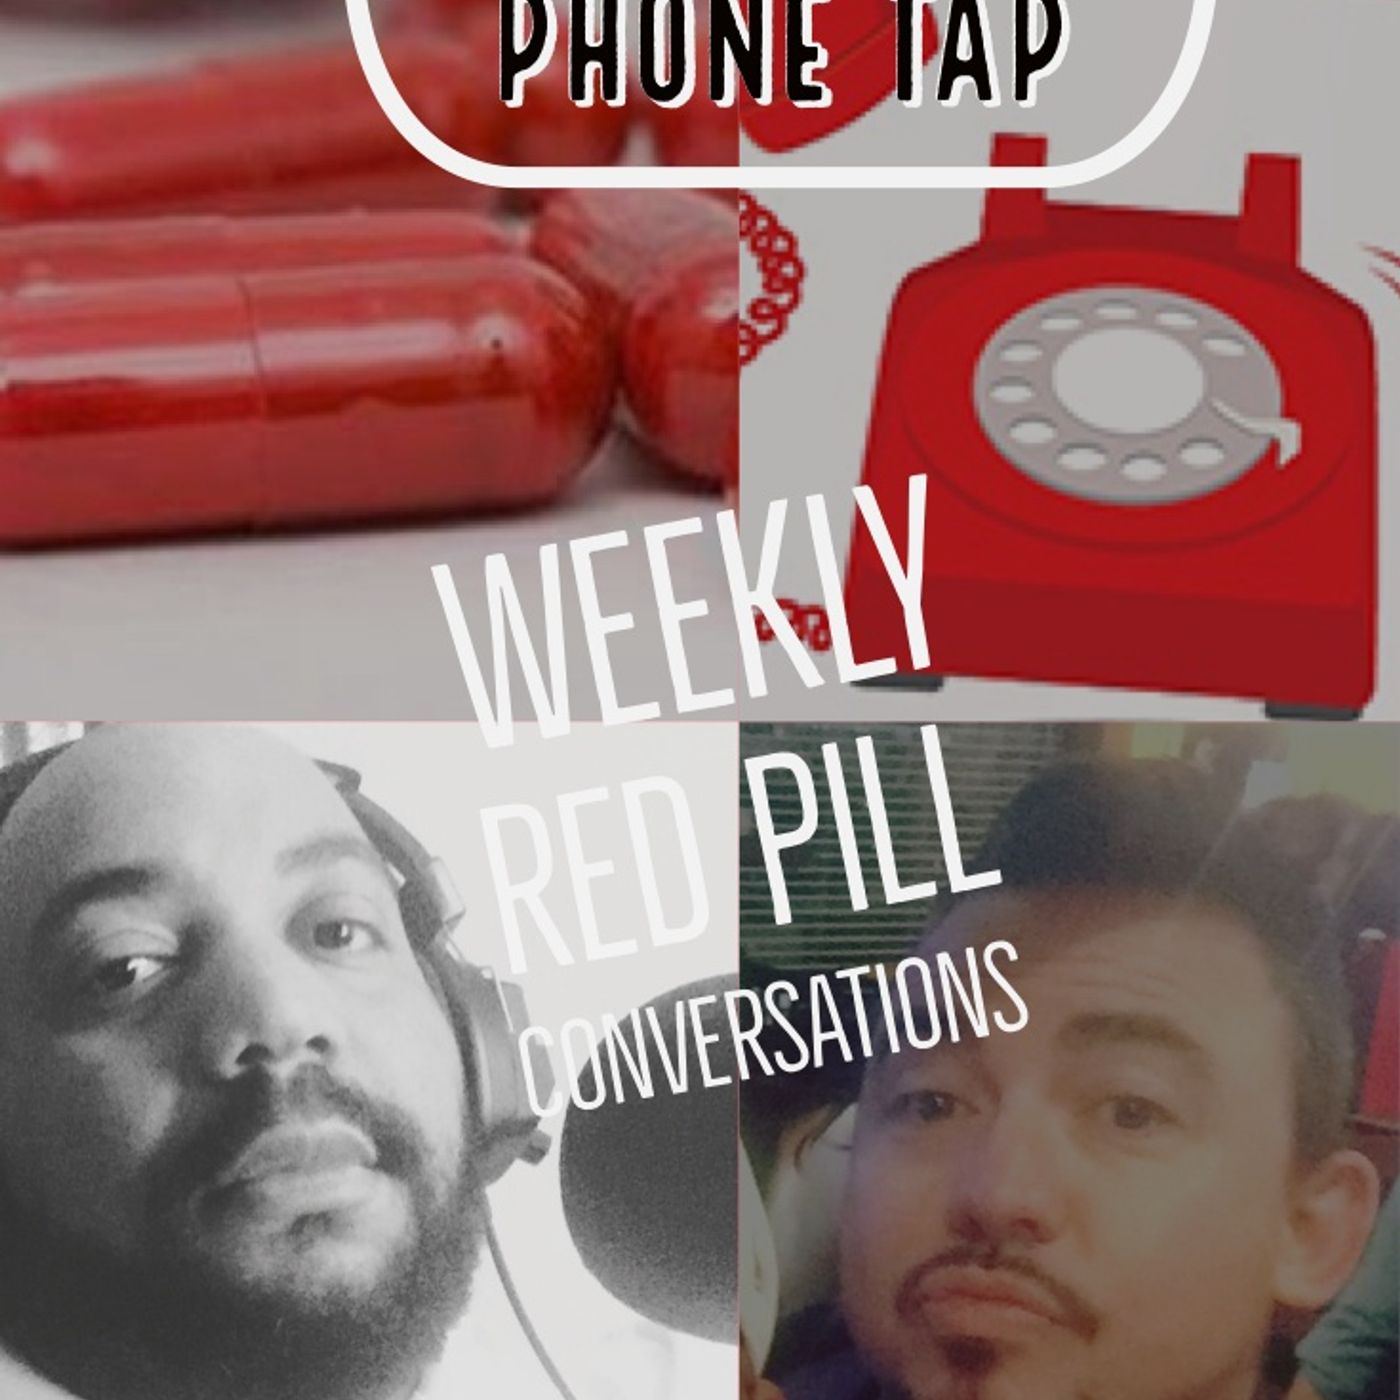 Dating Rotation Rotation Rotation - The Red Pill Phone Tap #48